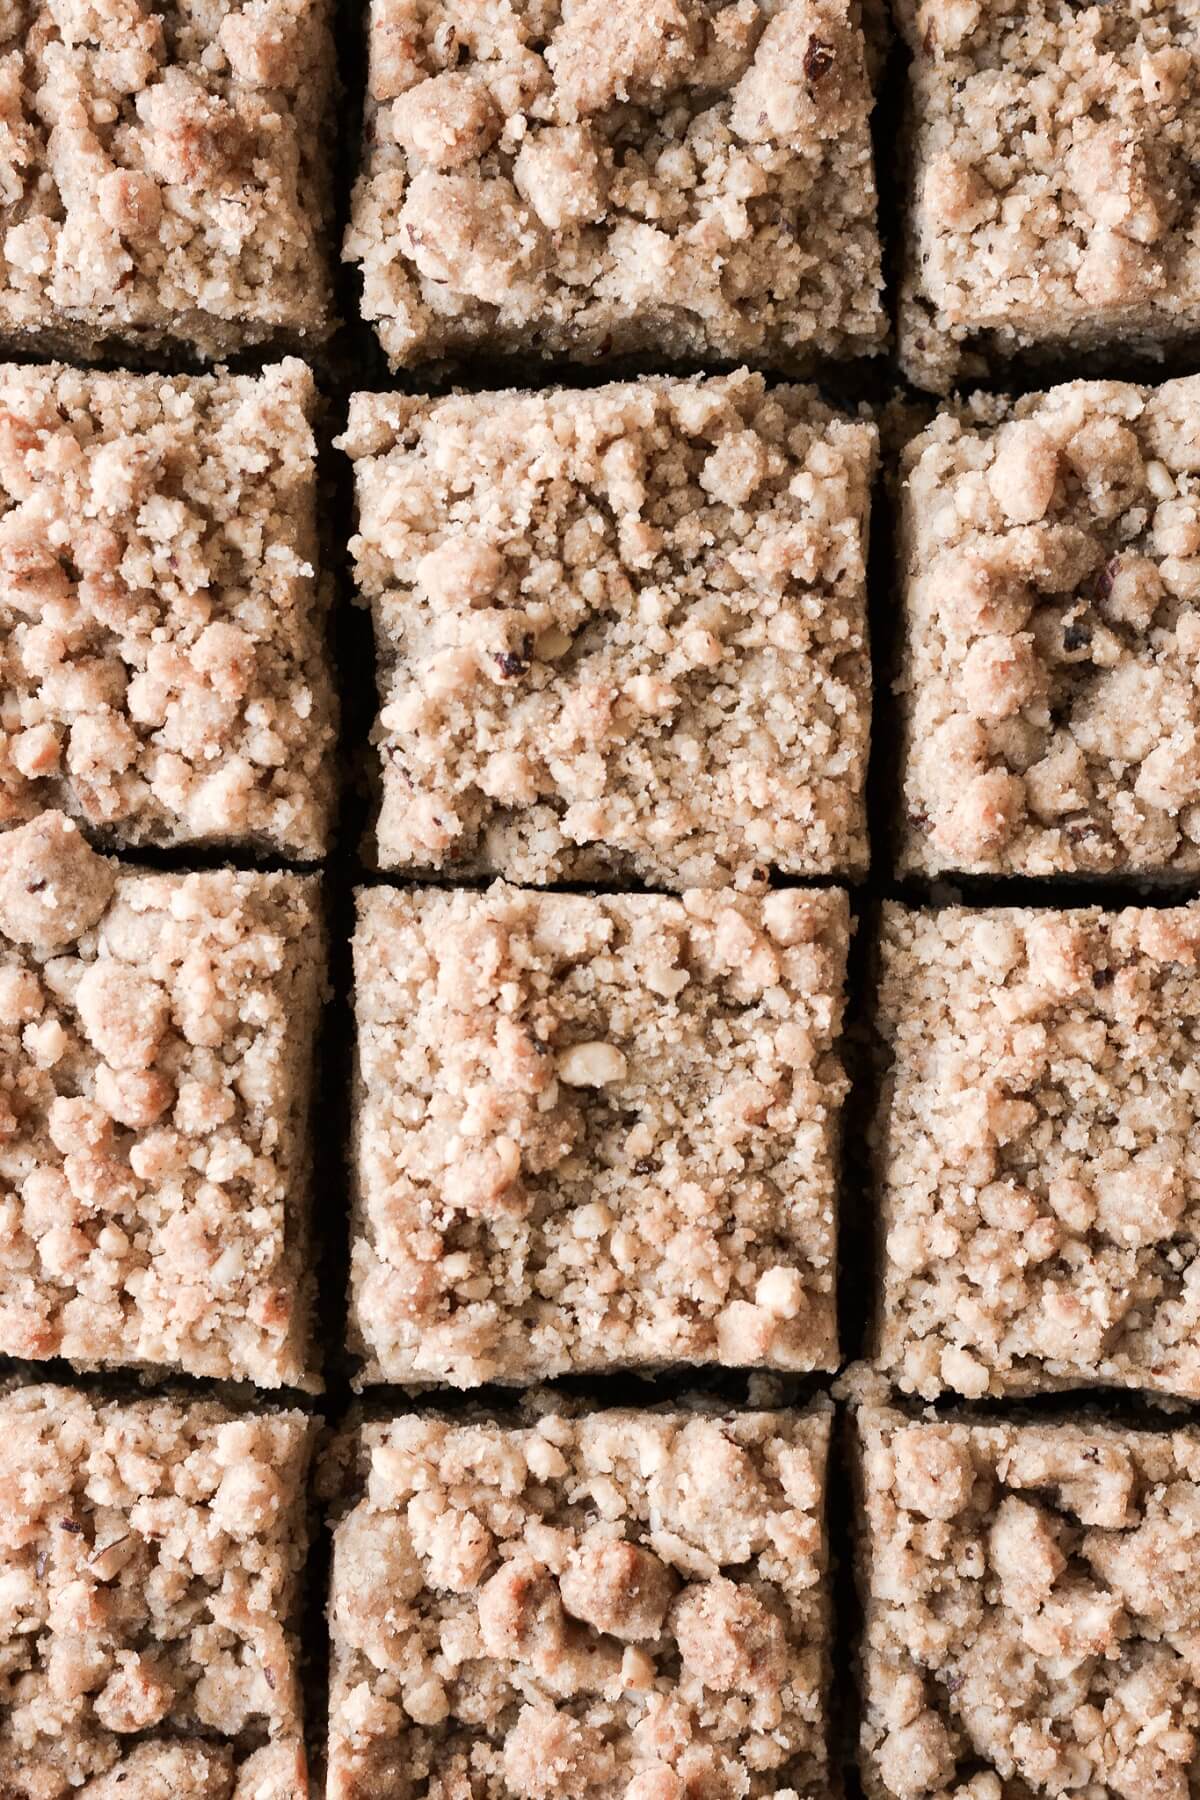 Hazelnut coffee cake with crumb topping cut into squares.